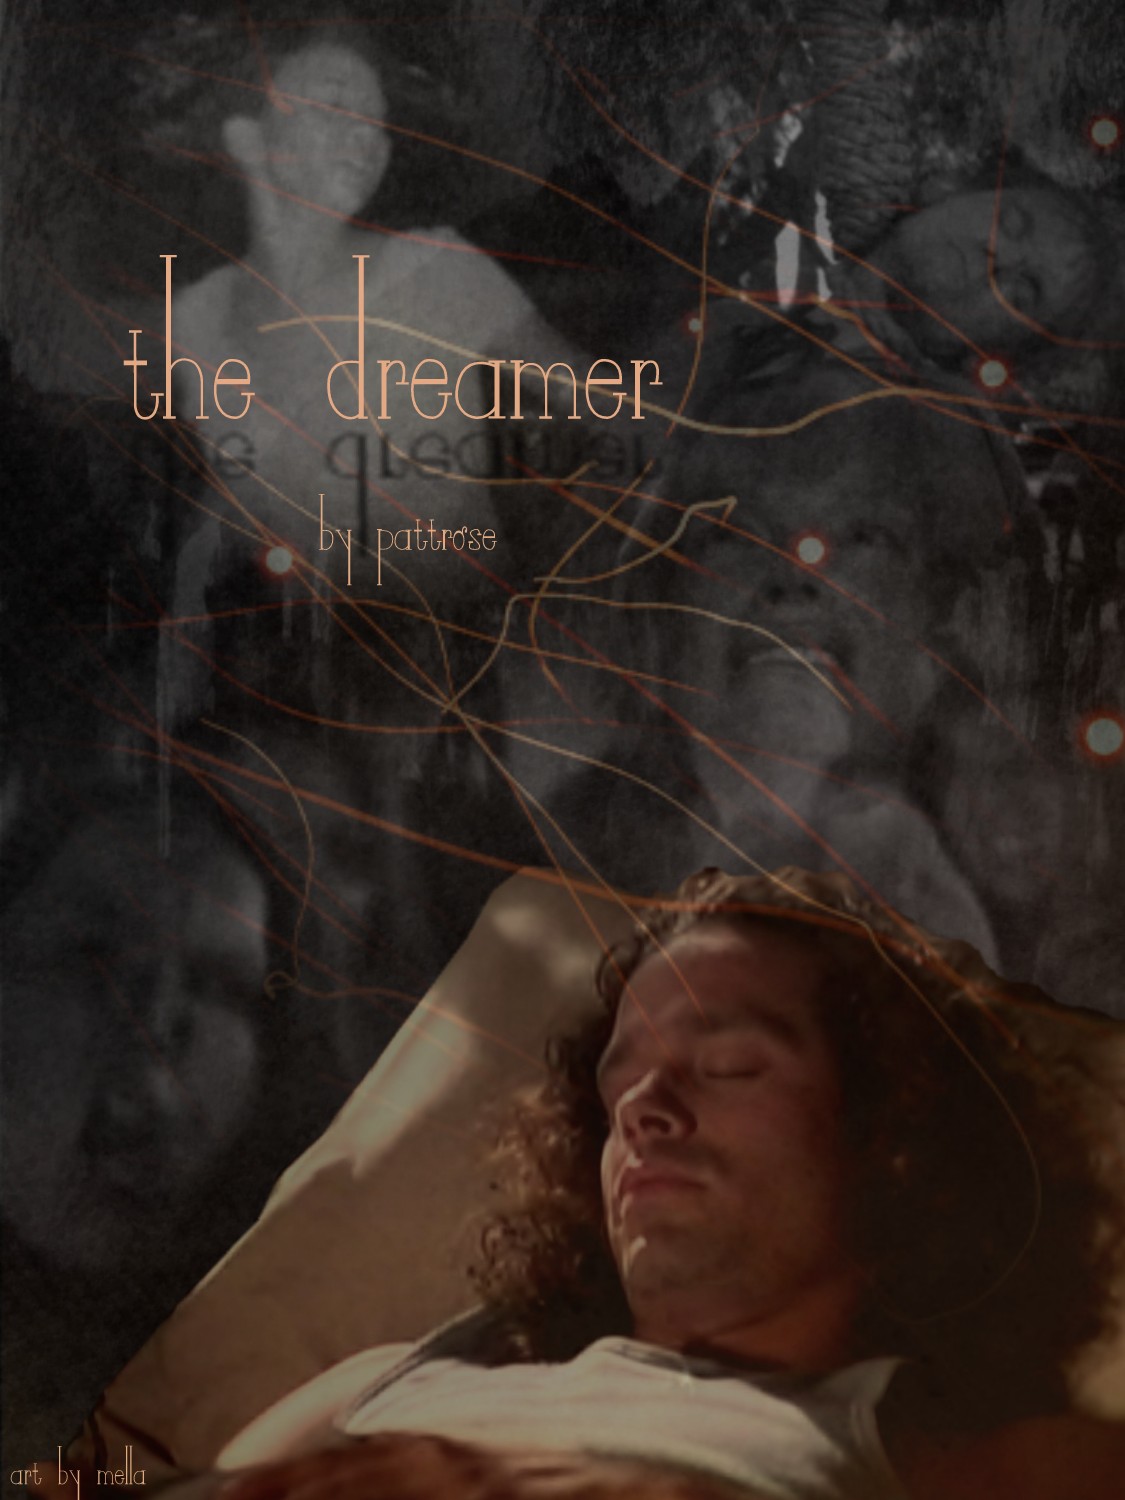 The Dreamer by PattRose, art by Mella68